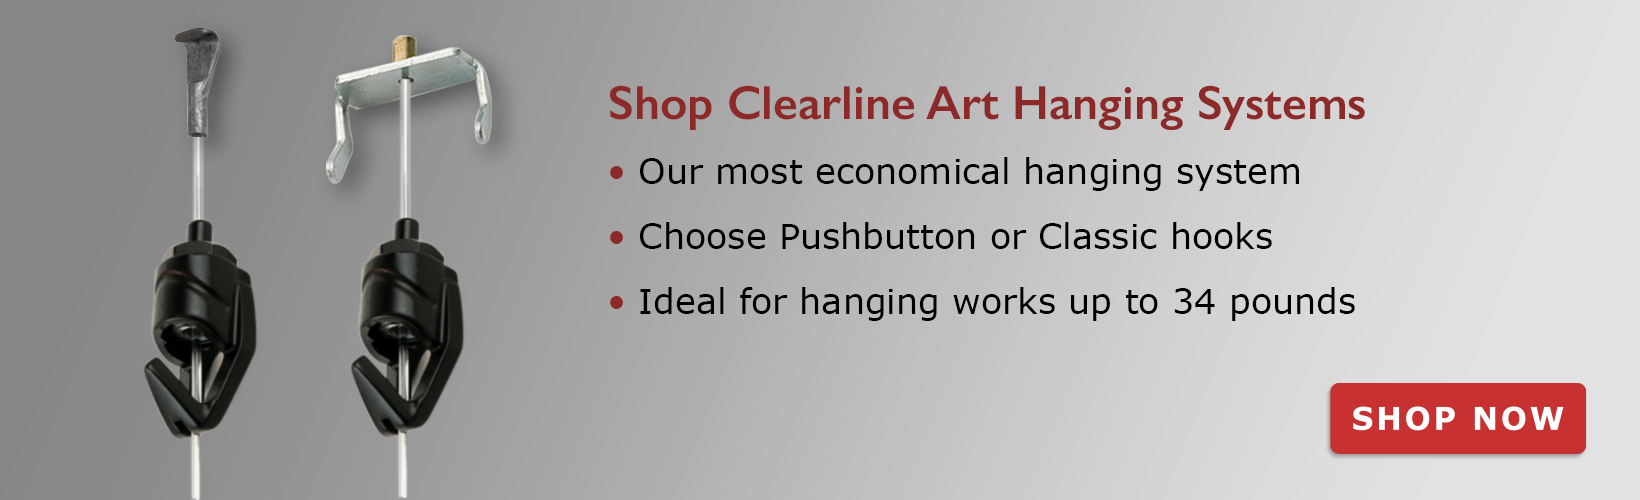 Clearline Gallery System art hanging system overview